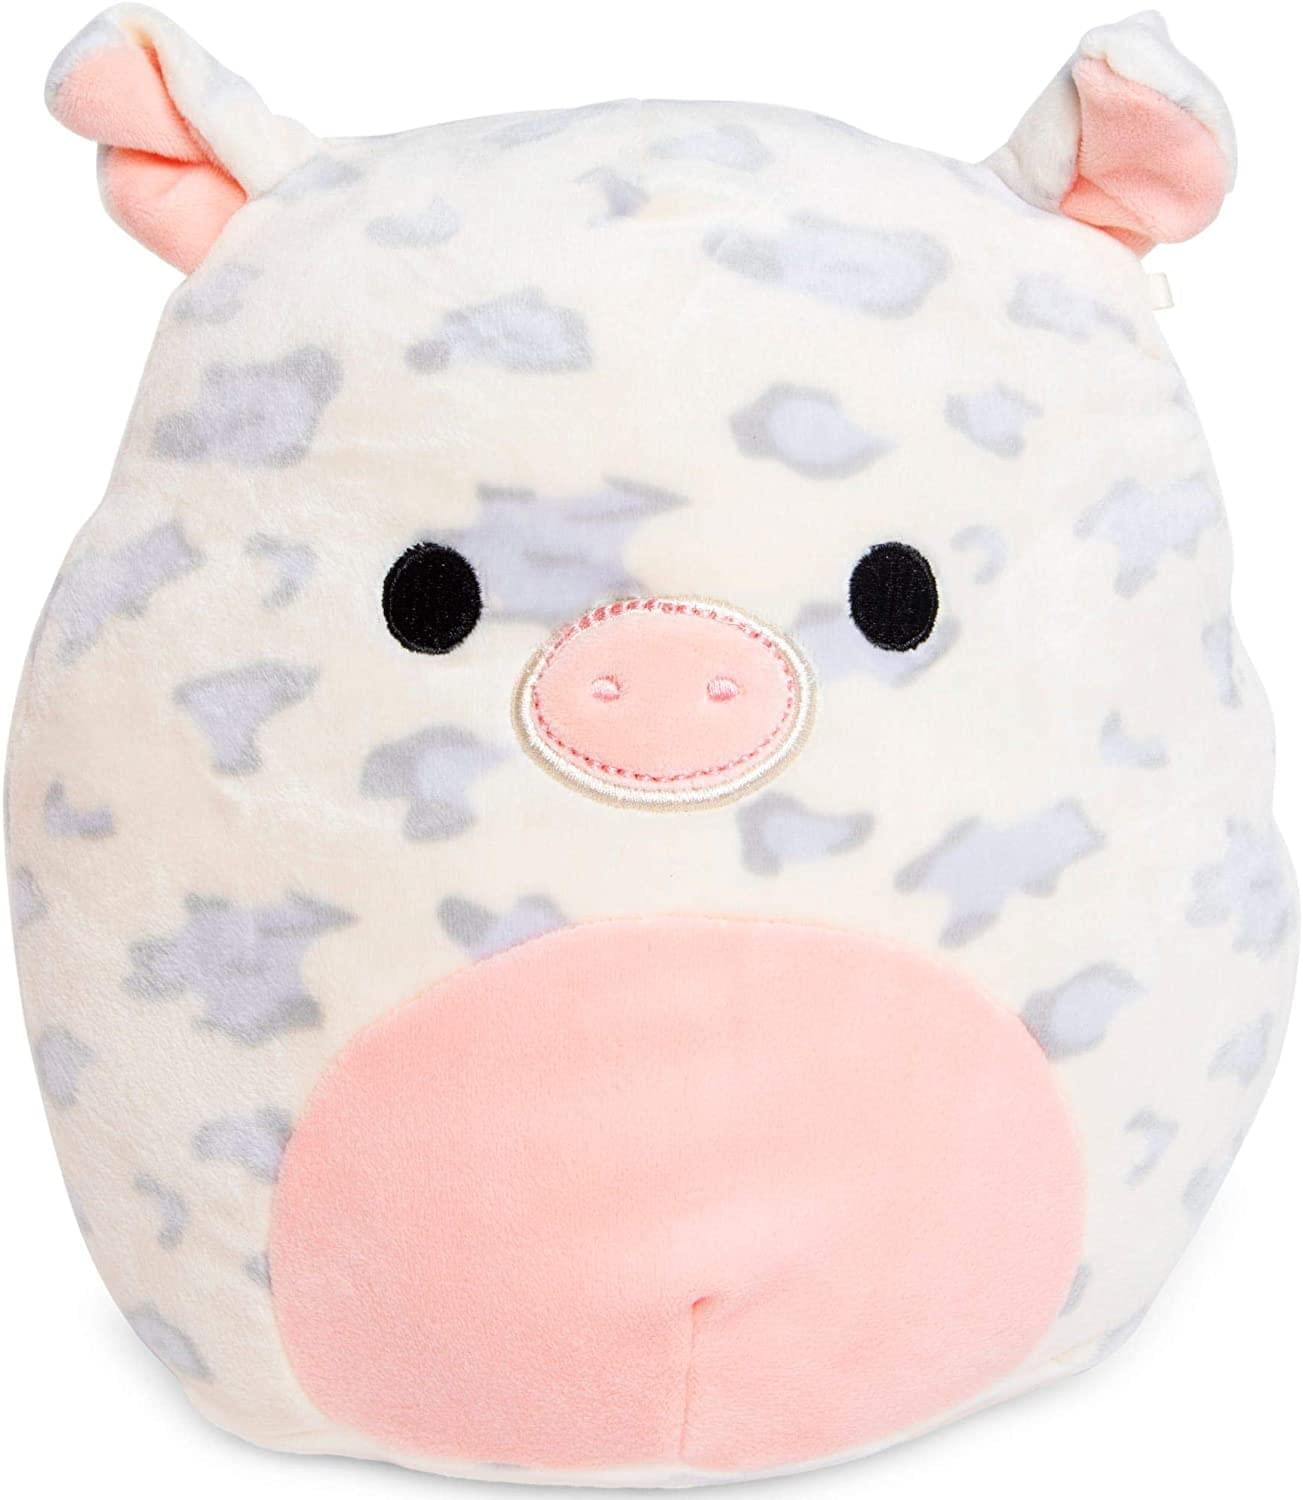 Squishmallows Rosie the Pig Bandana 12 inch Plush Toy for sale online 